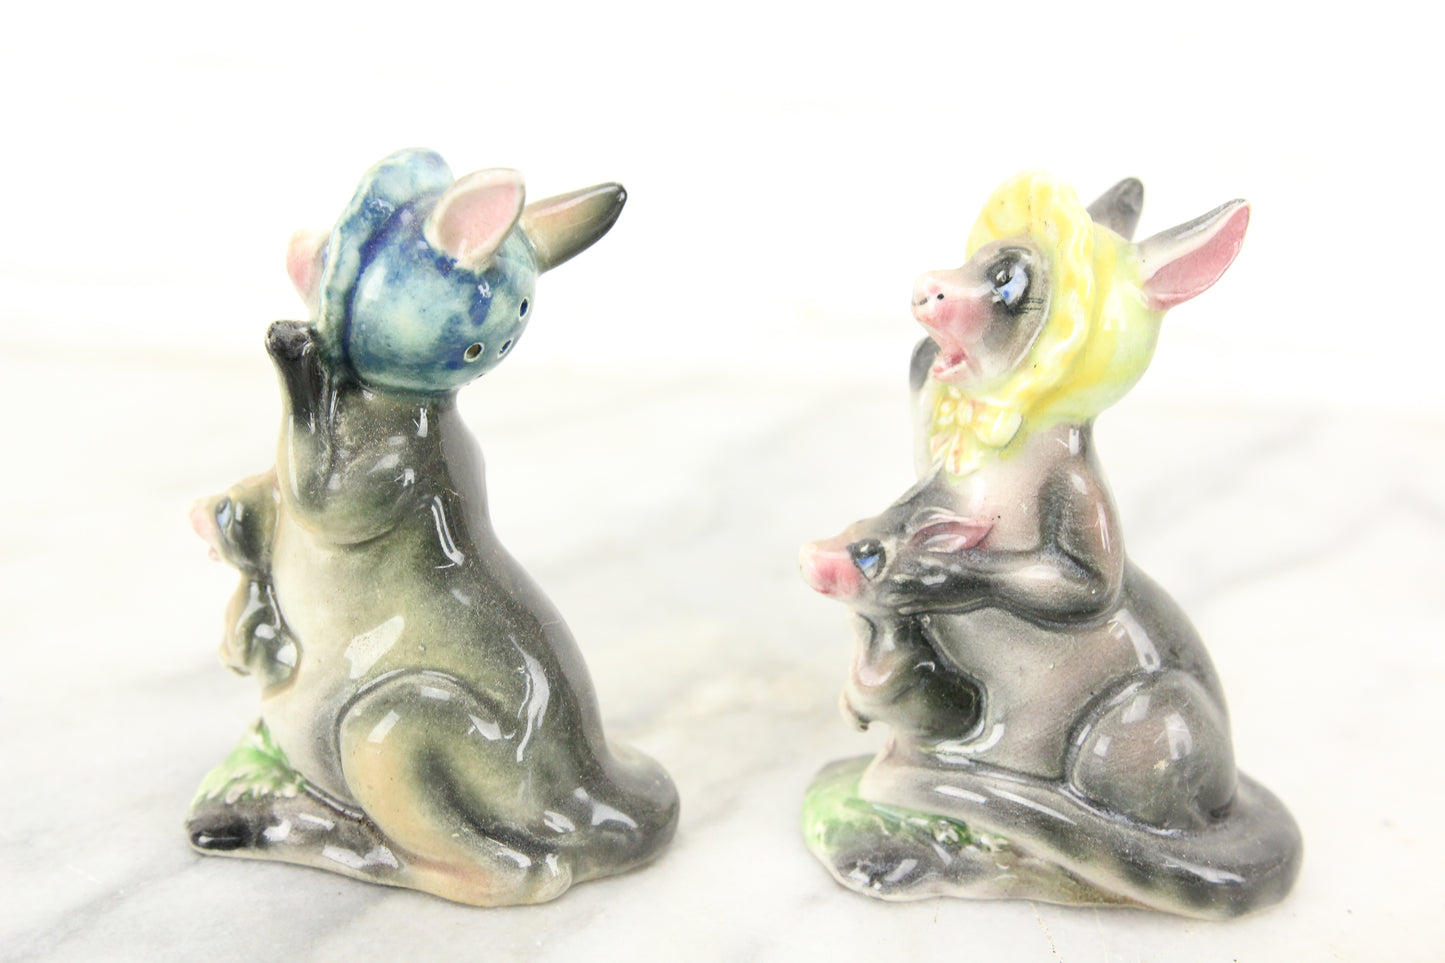 Kangaroos with Babies Porcelain Salt and Pepper Shakers, Made in Japan